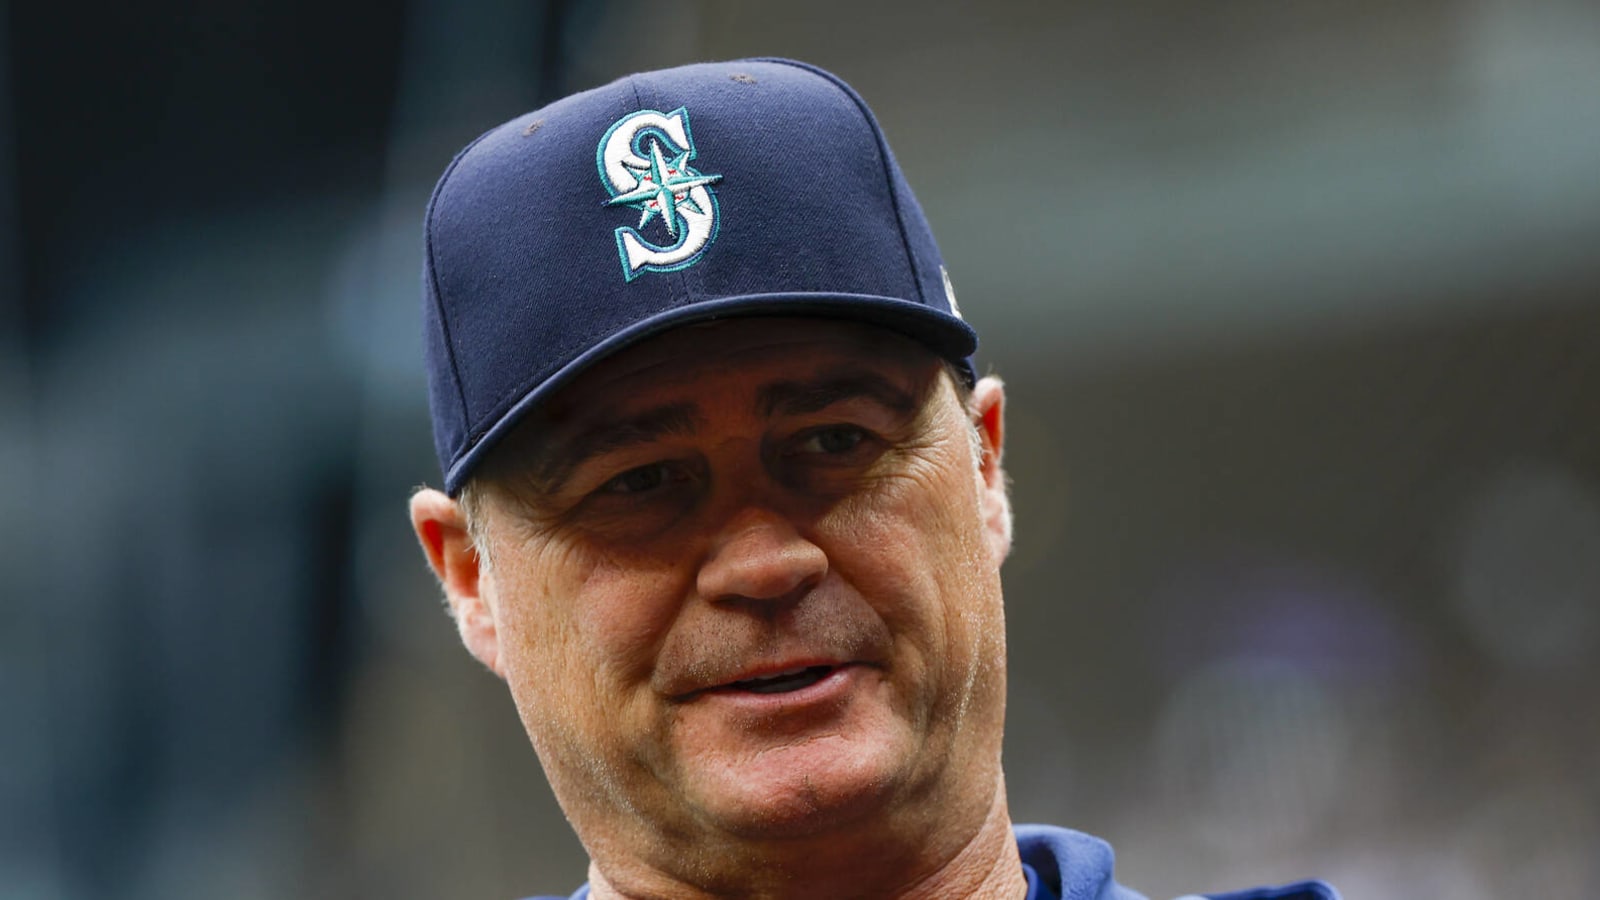 Mariners' Servais trolls Blue Jays' Manoah with ‘pressure’ quote